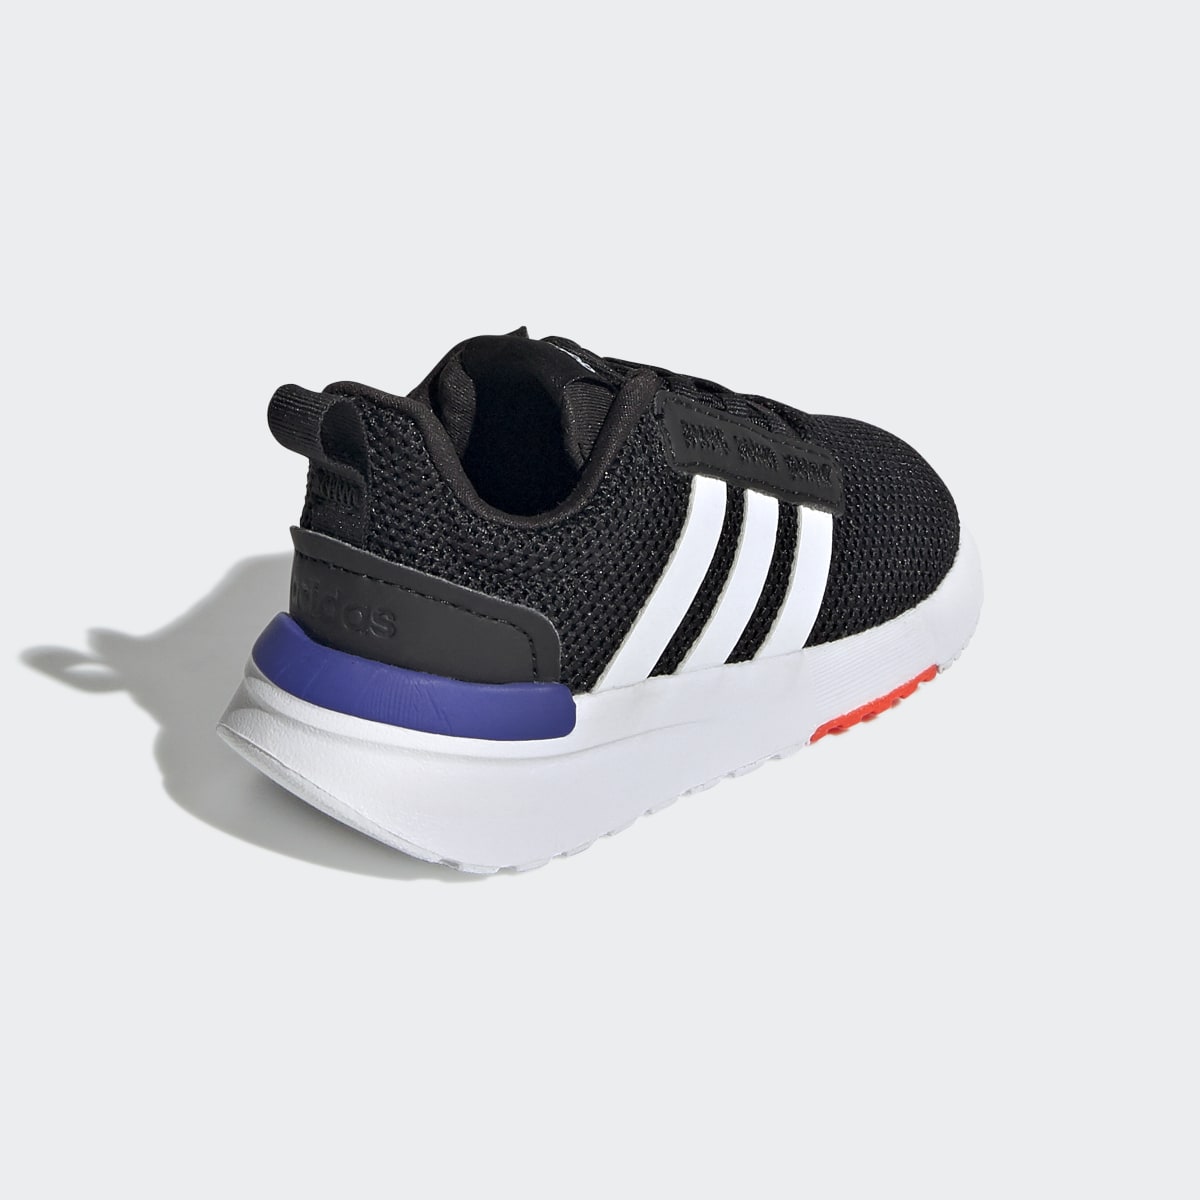 Adidas Racer TR21 Shoes. 6